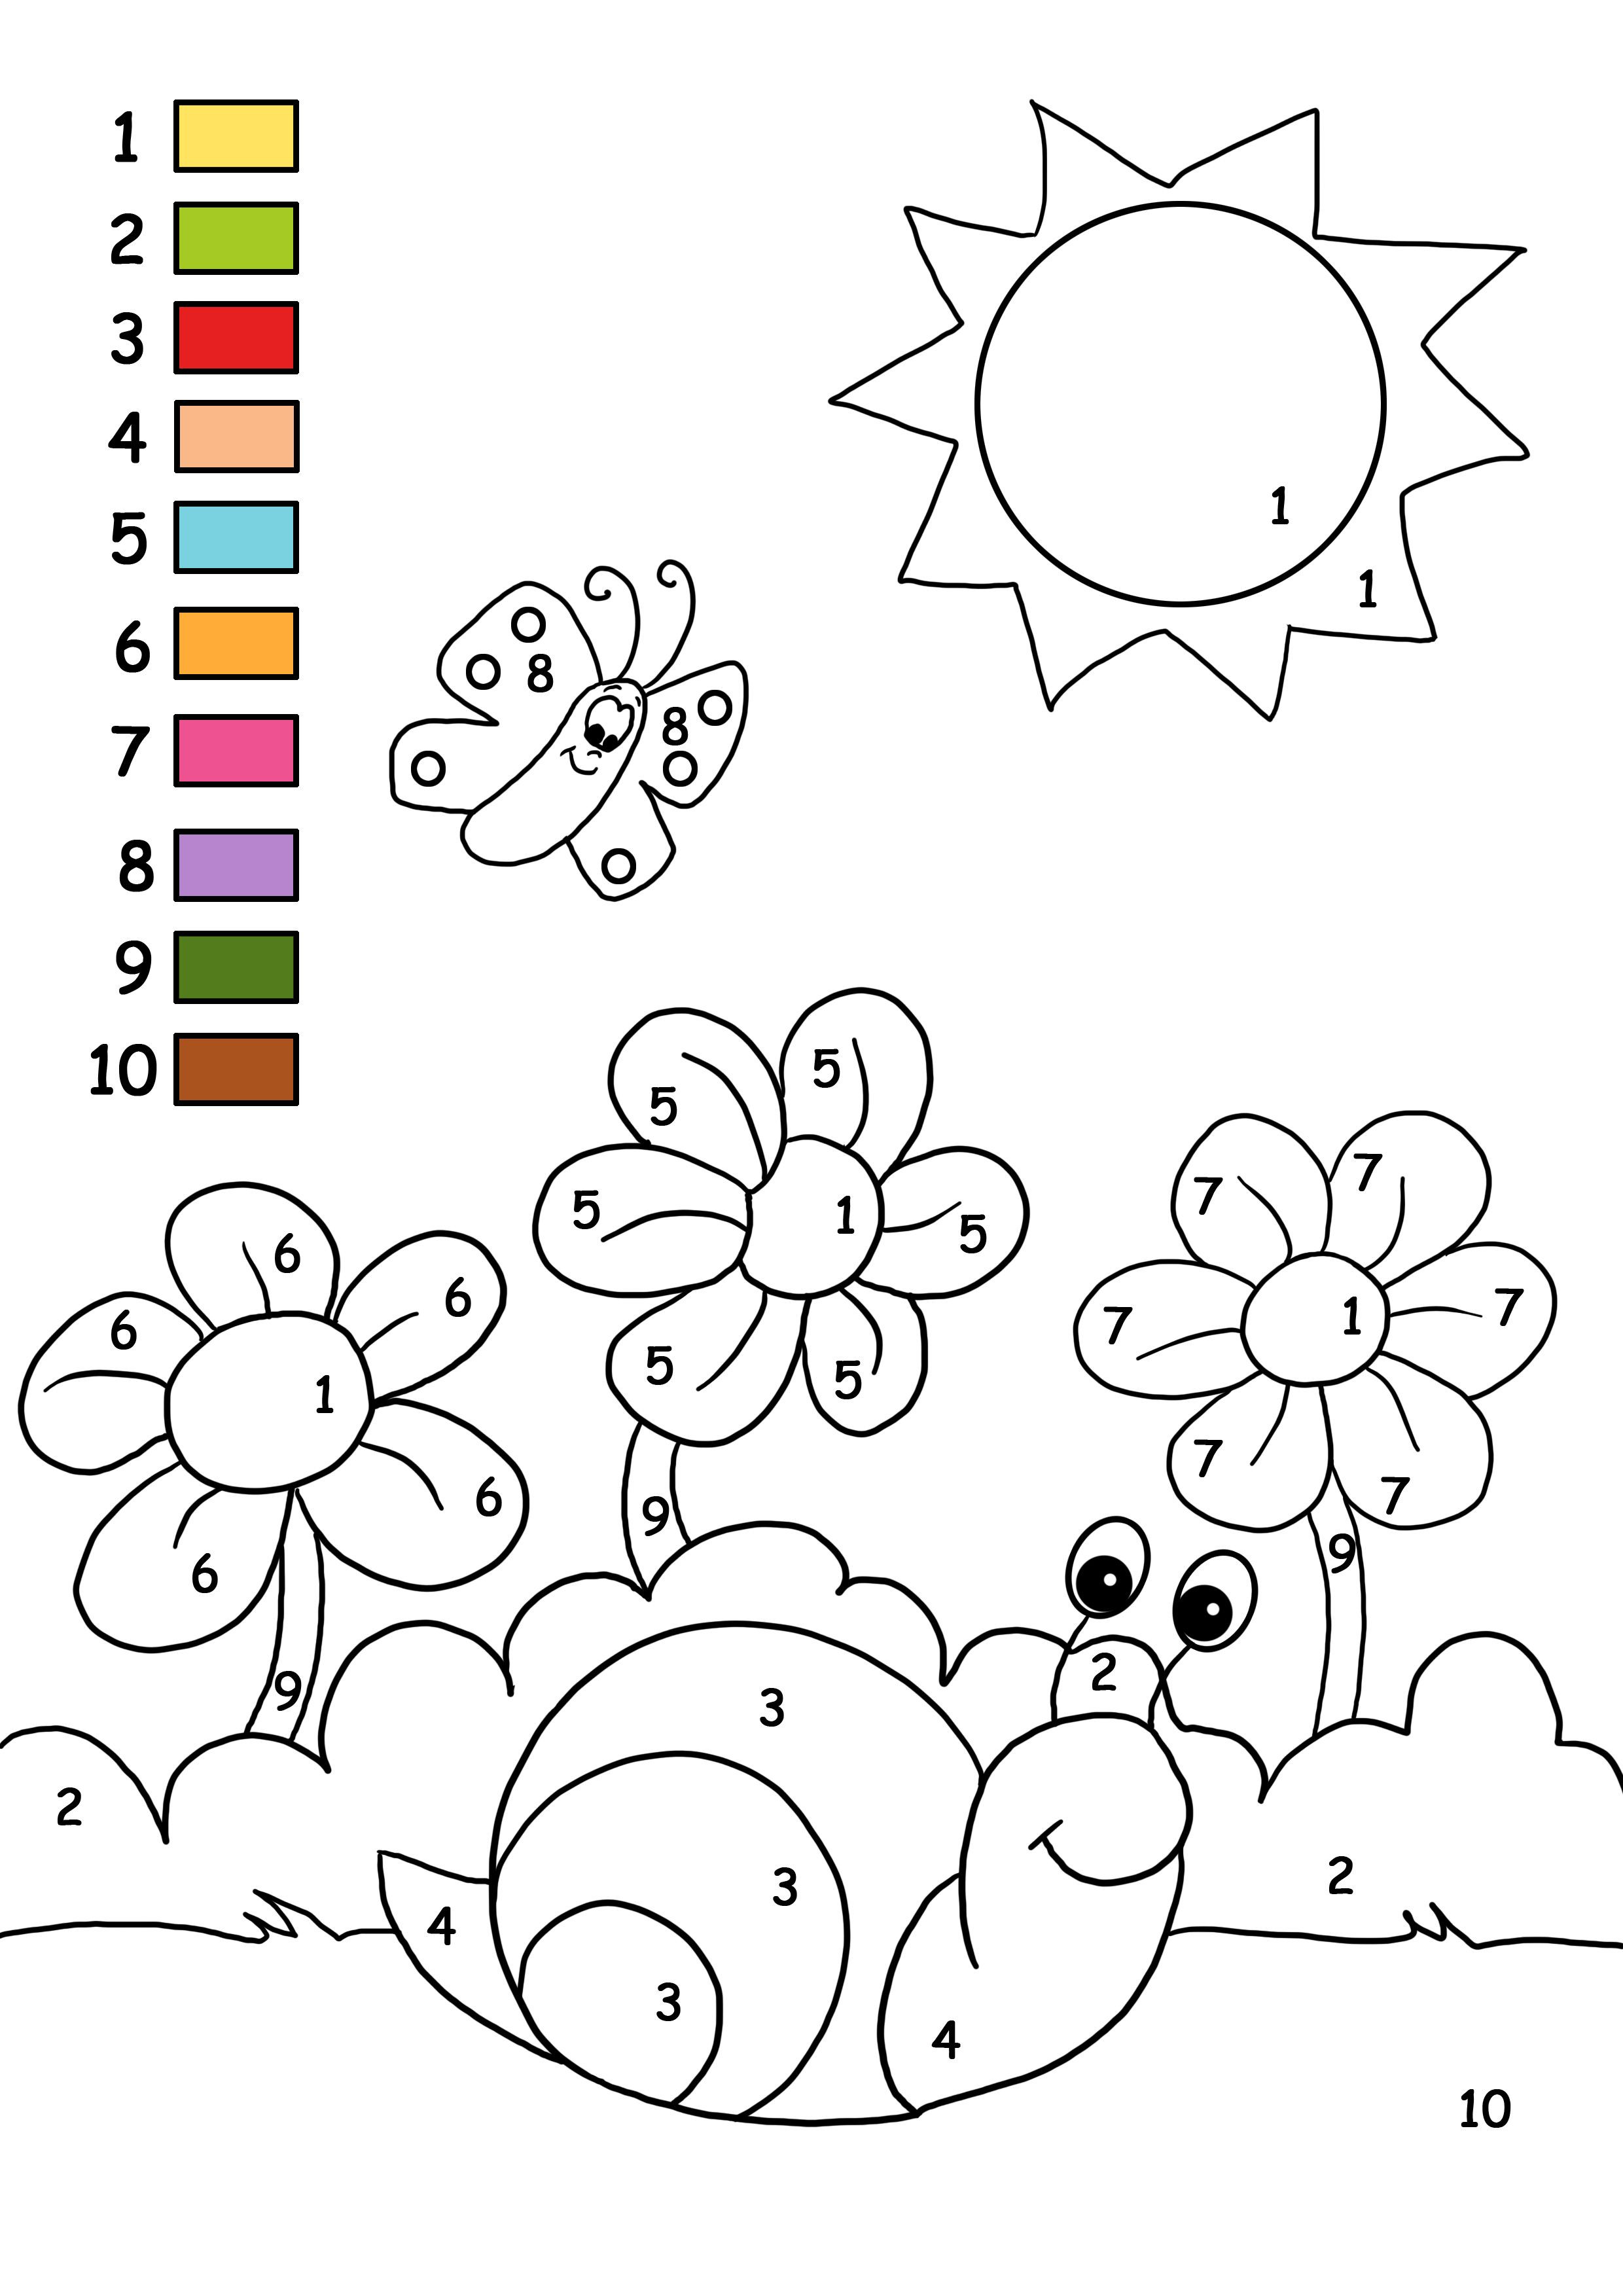 Online Coloring Pages For Kids Games
 Kids Activities Printable Free Coloring Pages Coloring